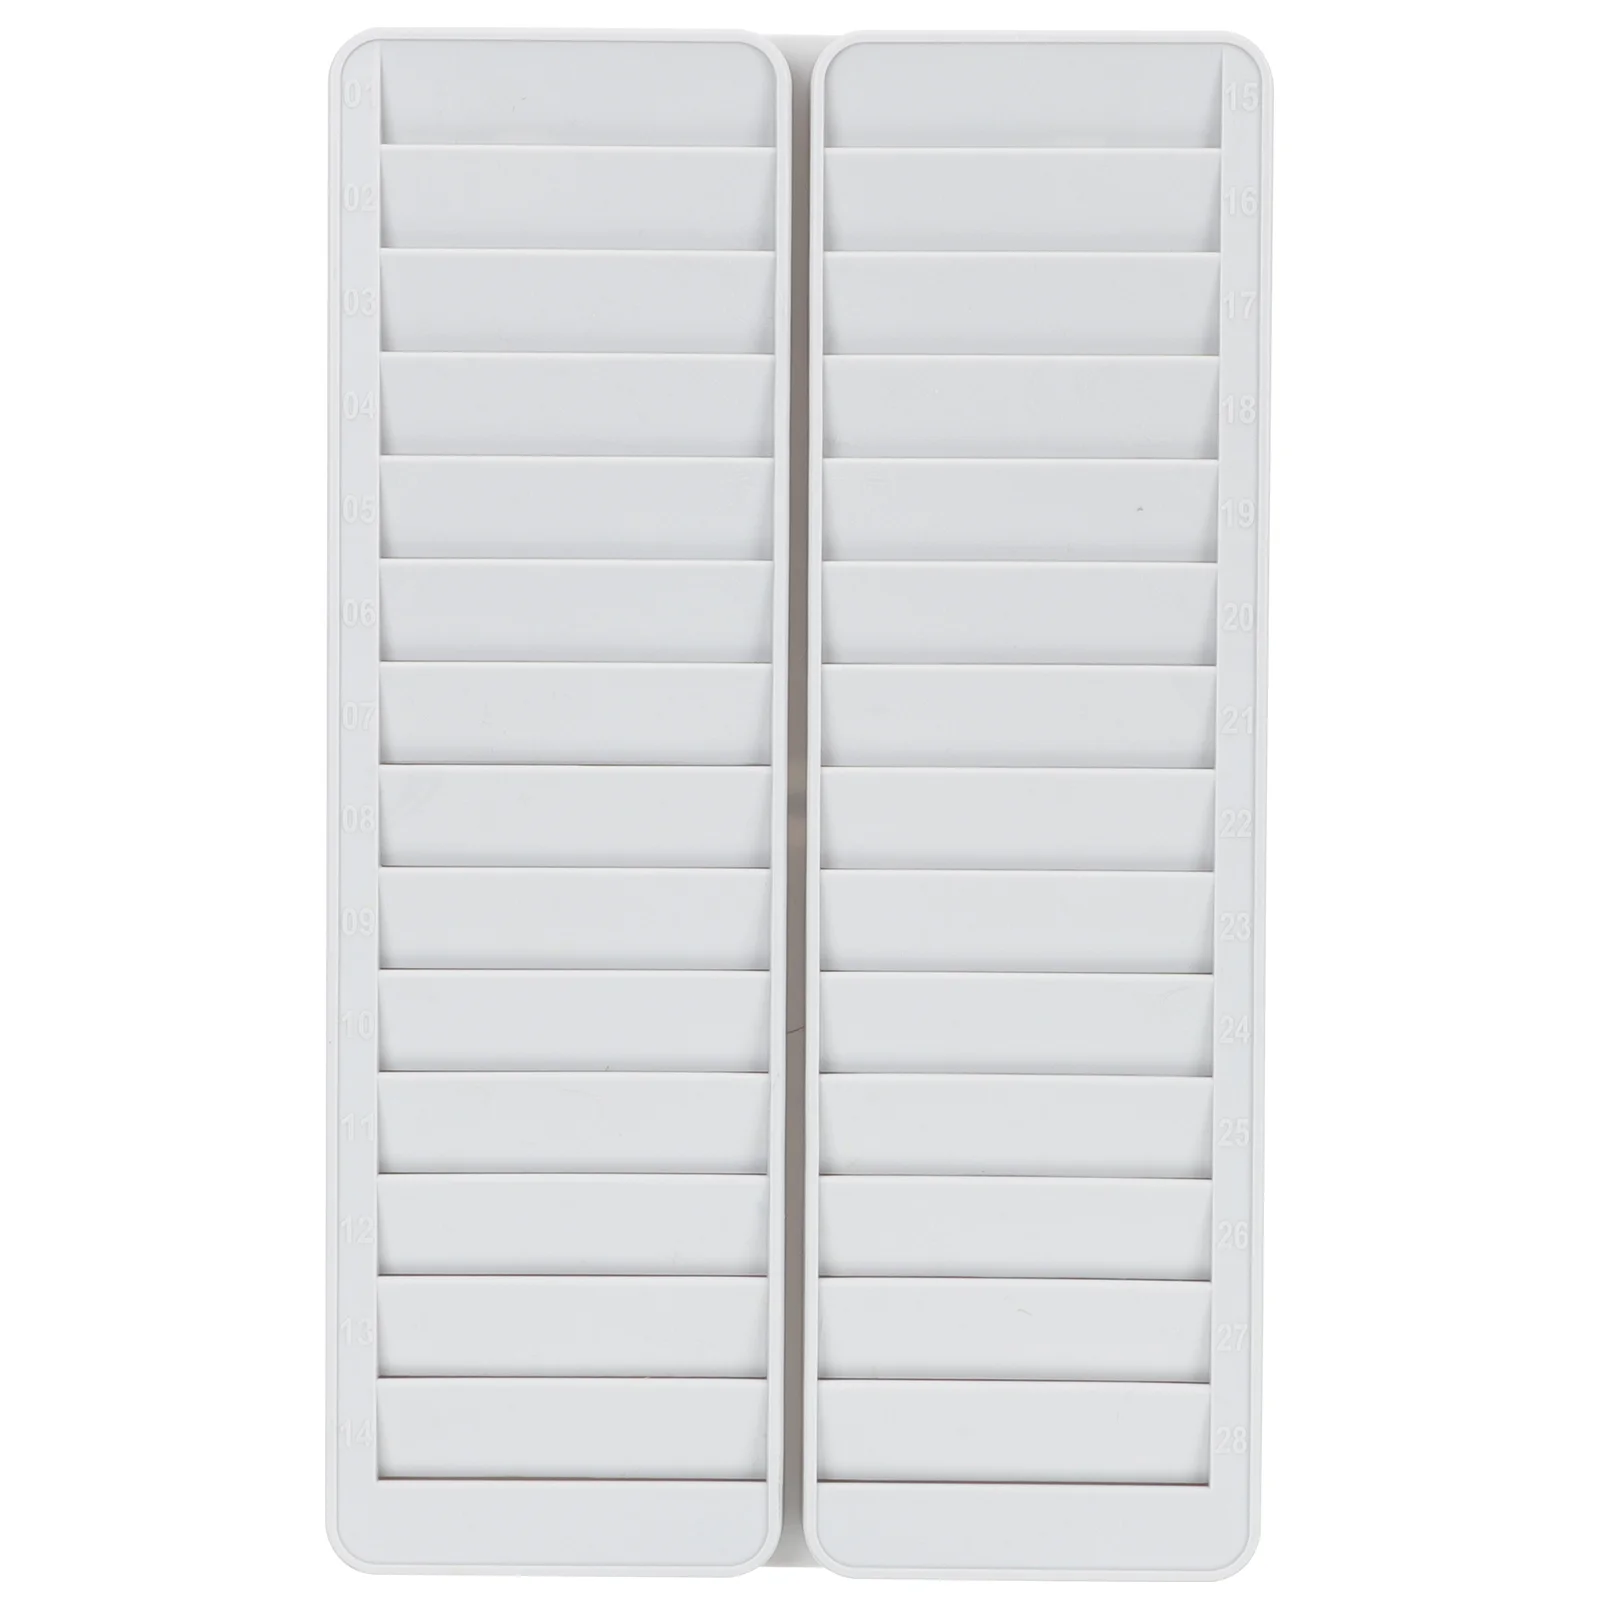 Wall Mount Stand Time Cards Hotel Room Cards Holder Hanging Time Cards Holder Time Cards Rack for Warehouse School Hotel